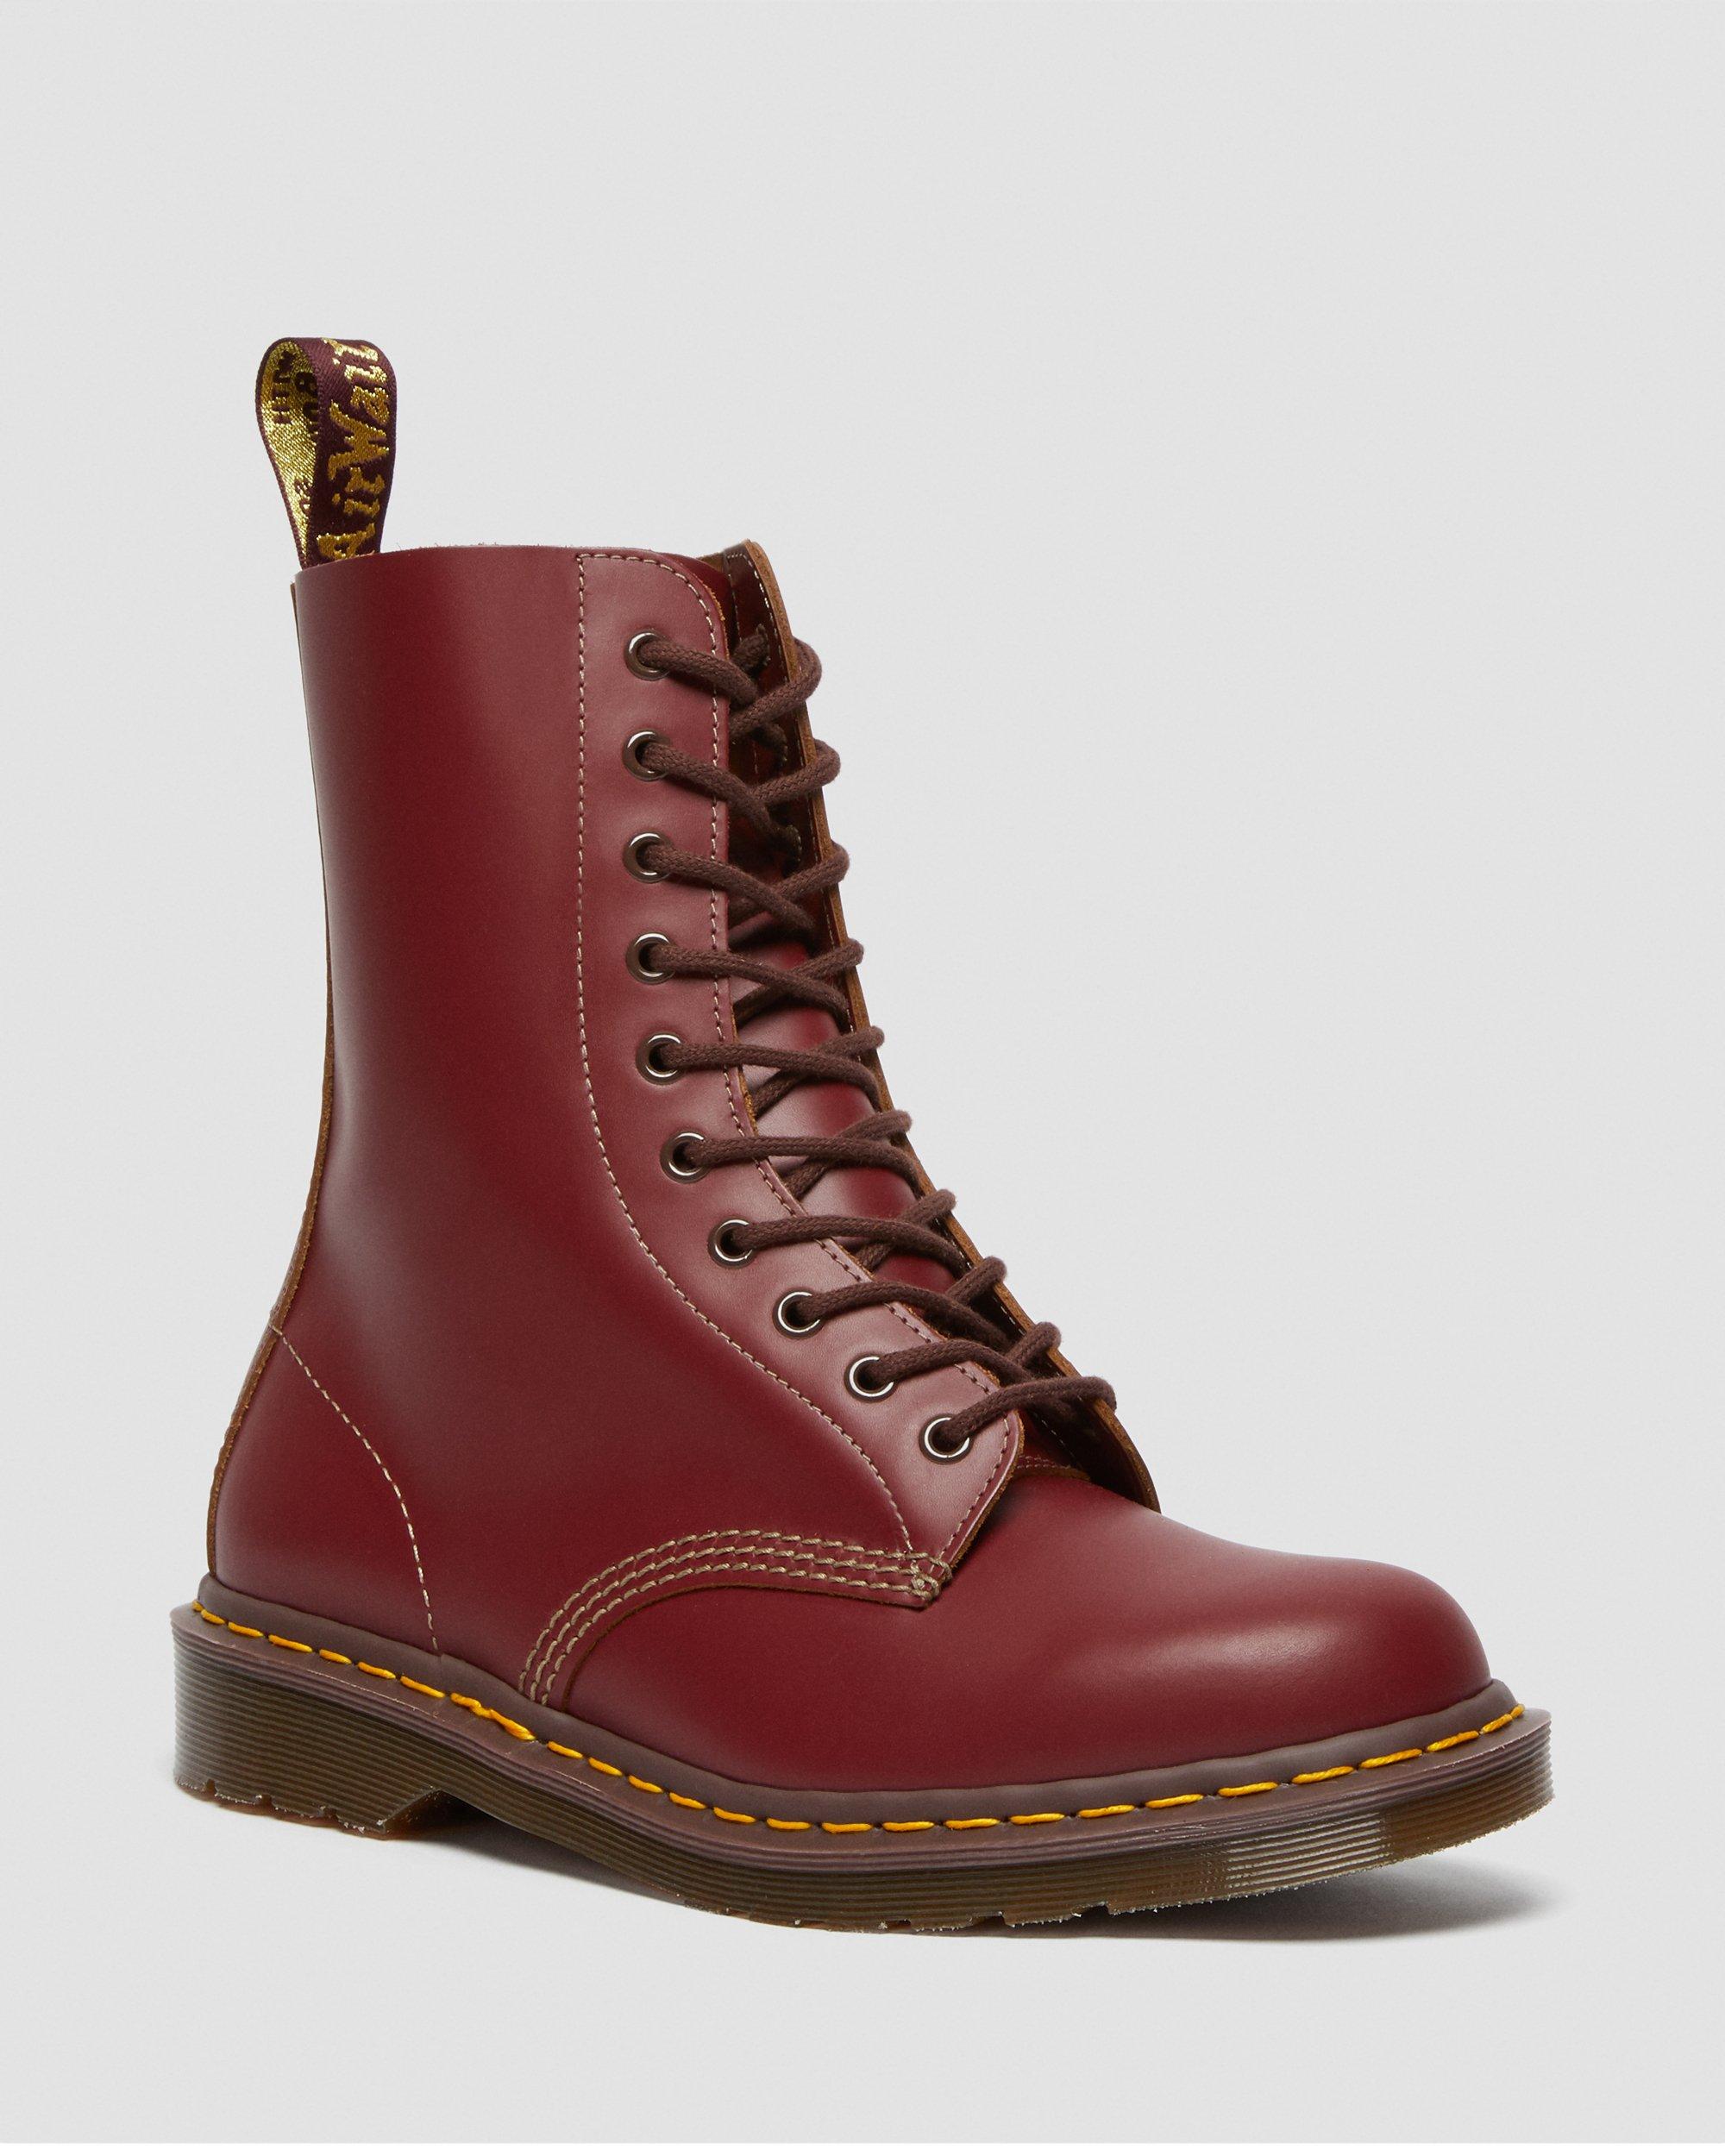 1490 Vintage Made In England Mid Calf Boots | Dr. Martens